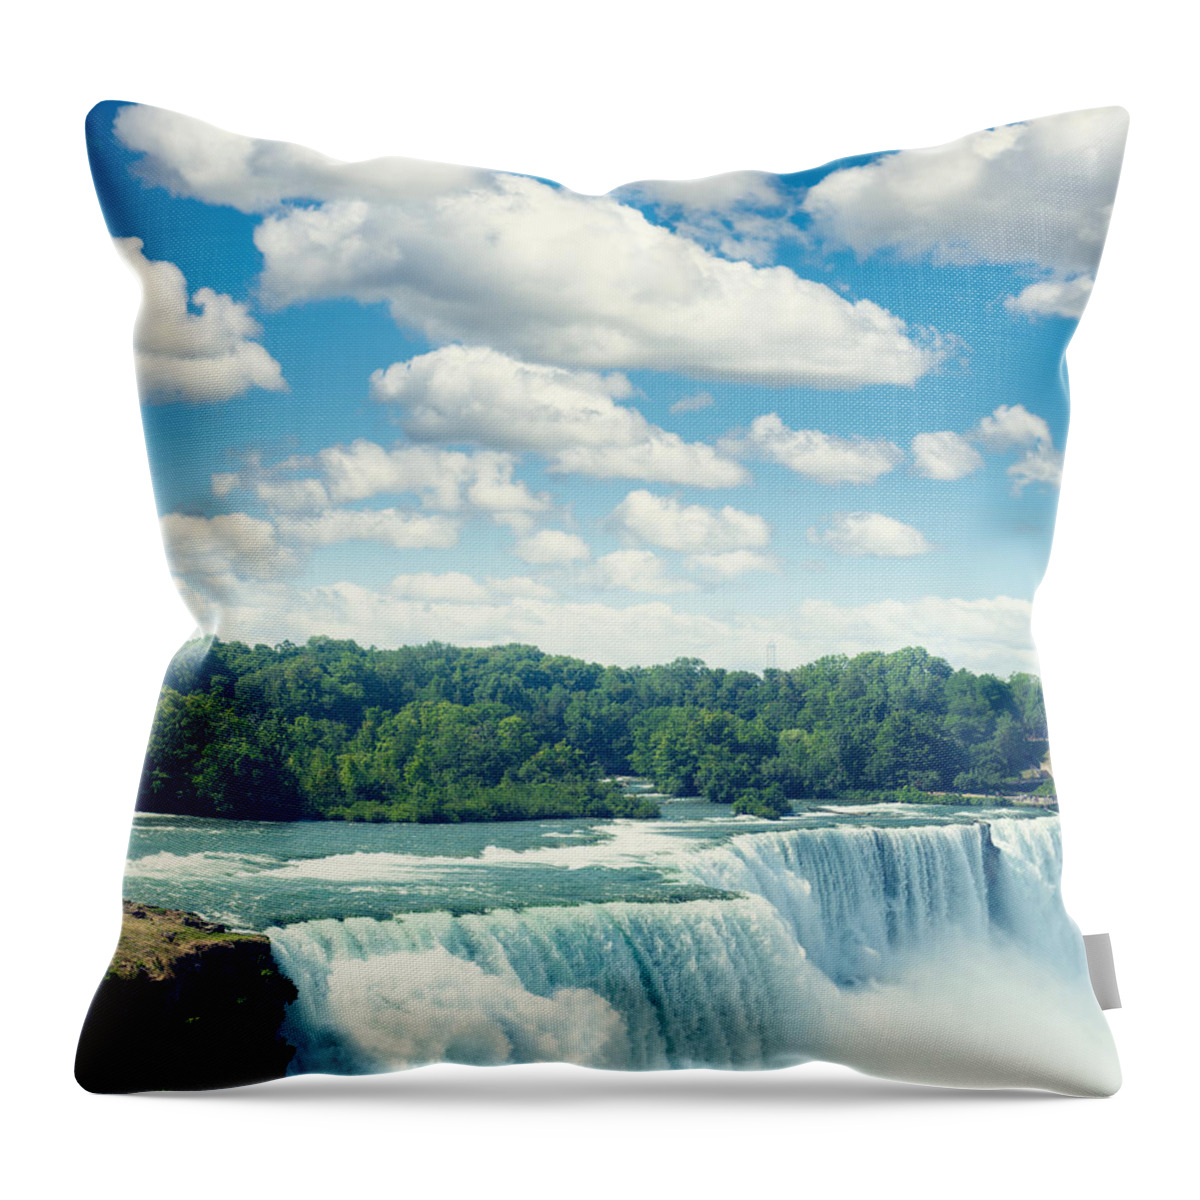 Scenics Throw Pillow featuring the photograph Niagara Falls From The Usa Side by Franckreporter